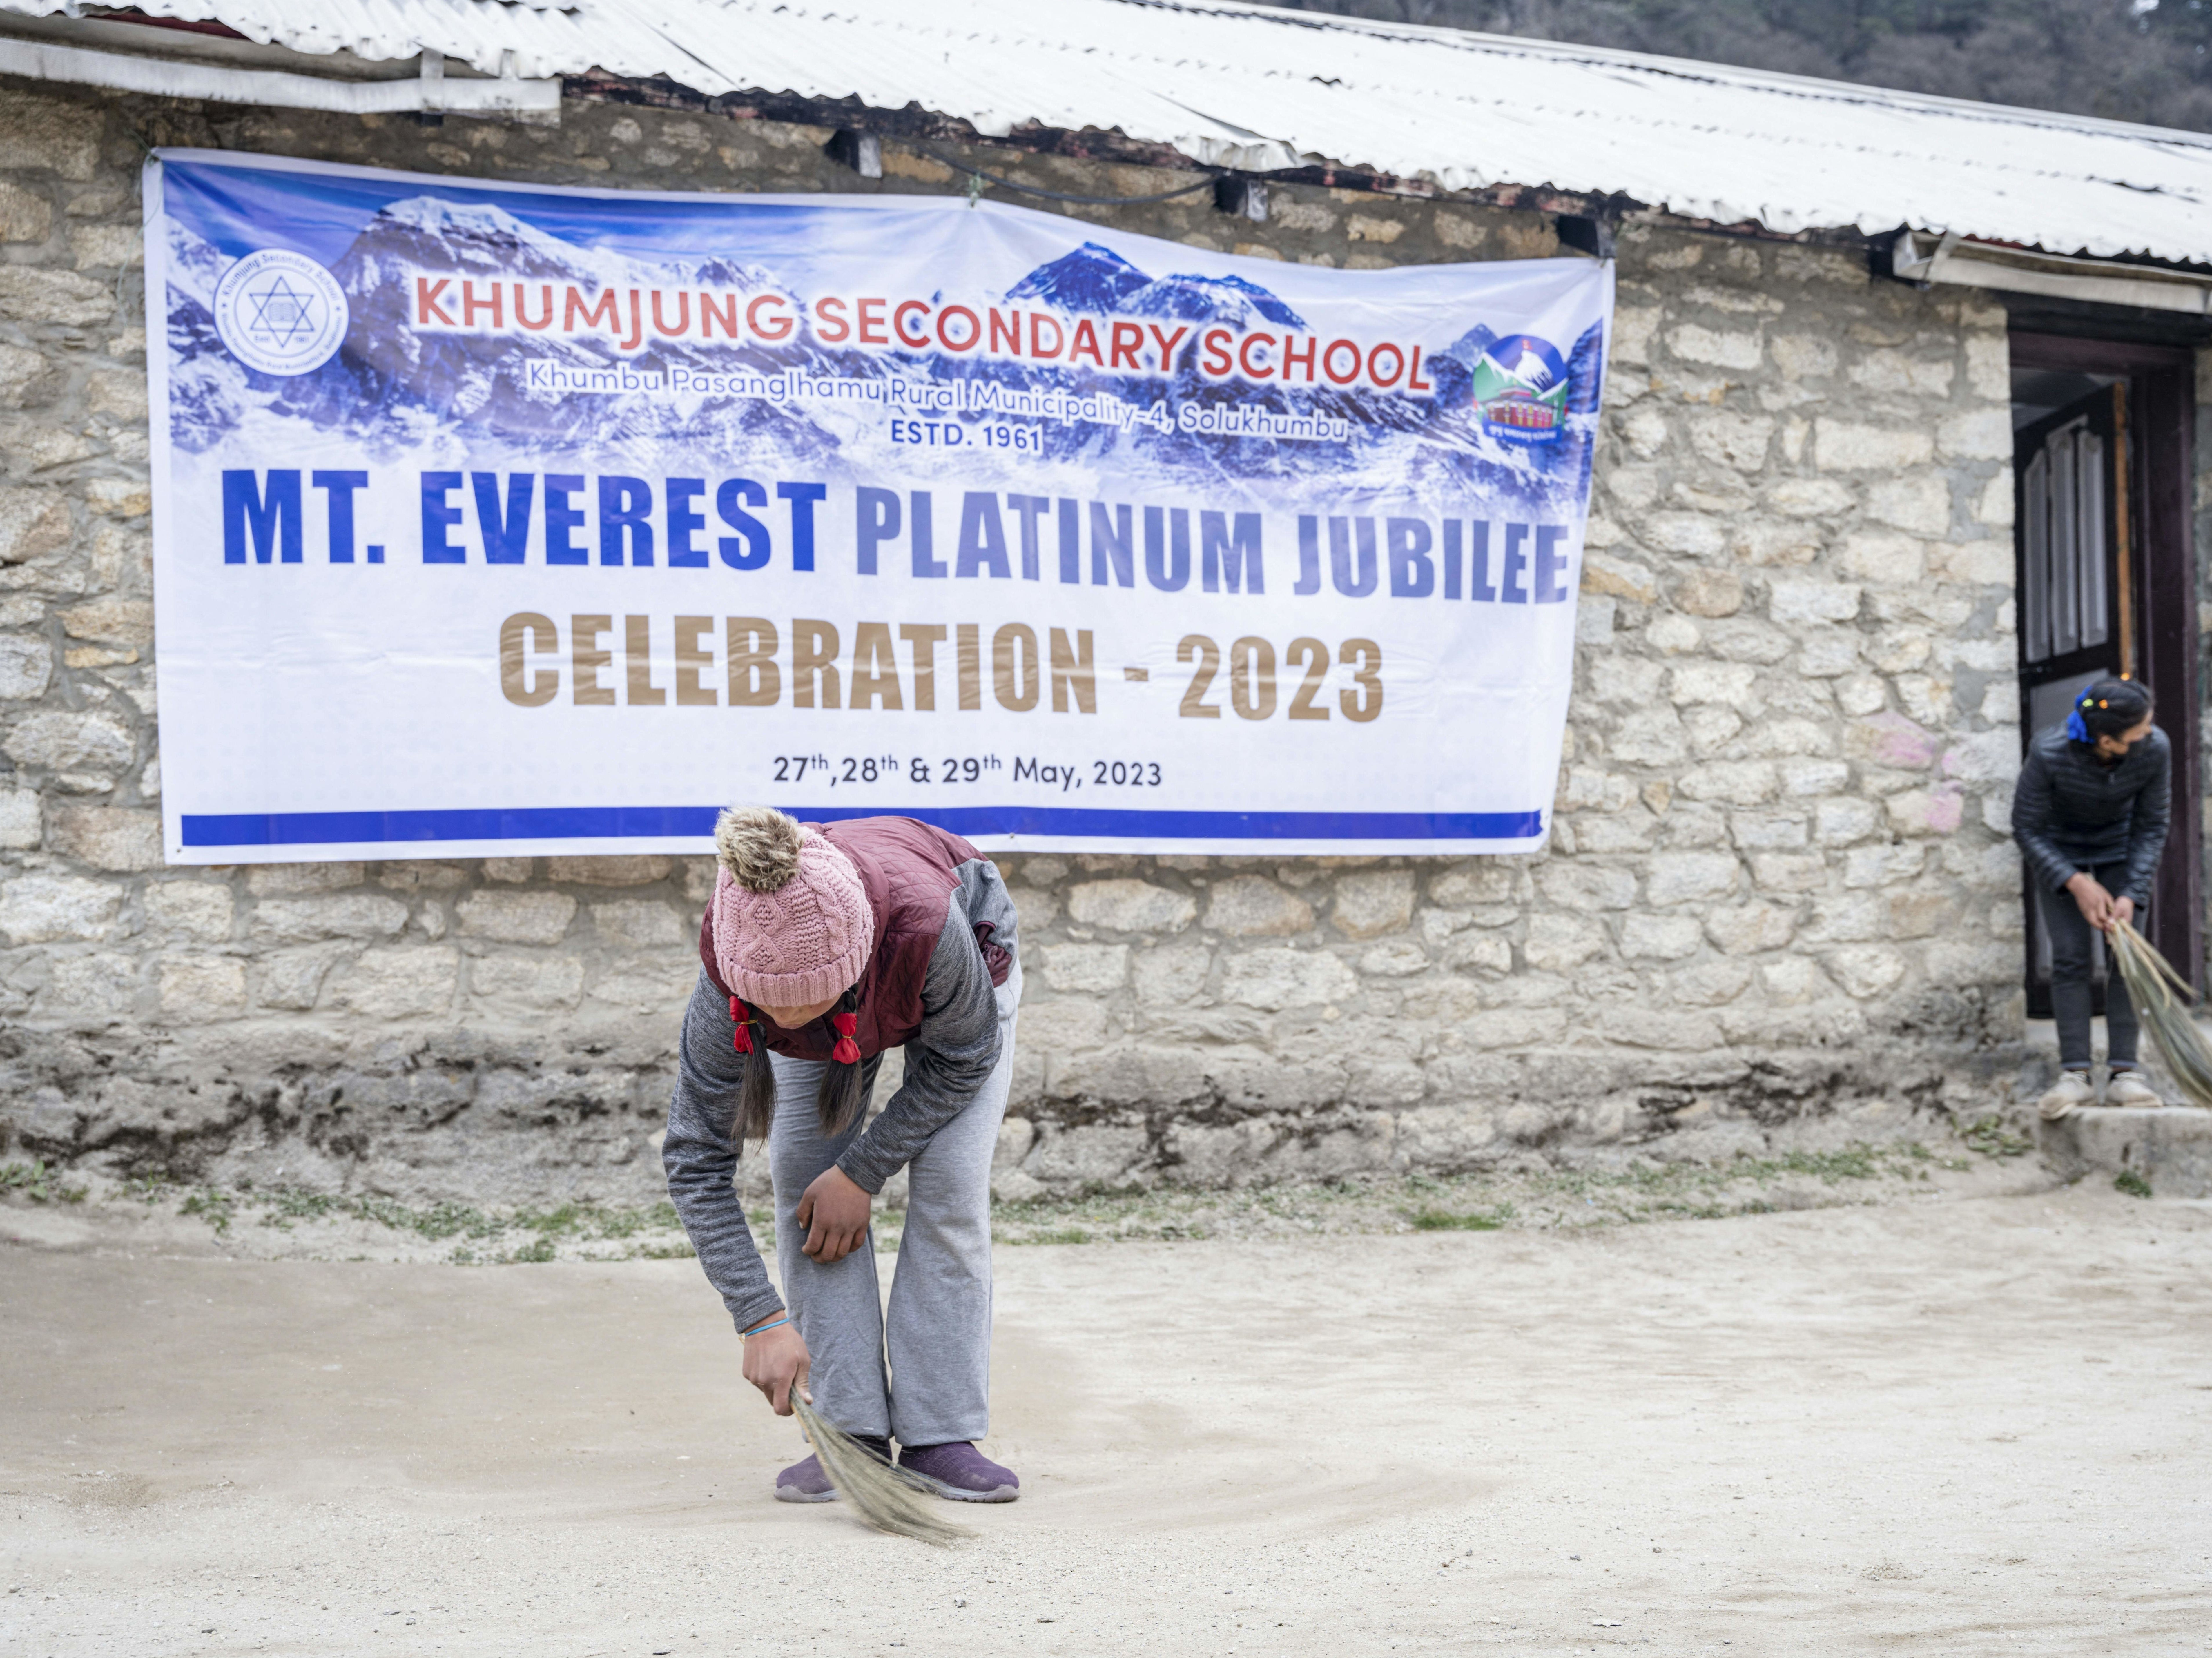 Students clean the Khumjung School which was established by Edmund Hillary, ahead of the Everest Day celebrations in the village of Khumjung, located in the shadow of Mount Everest